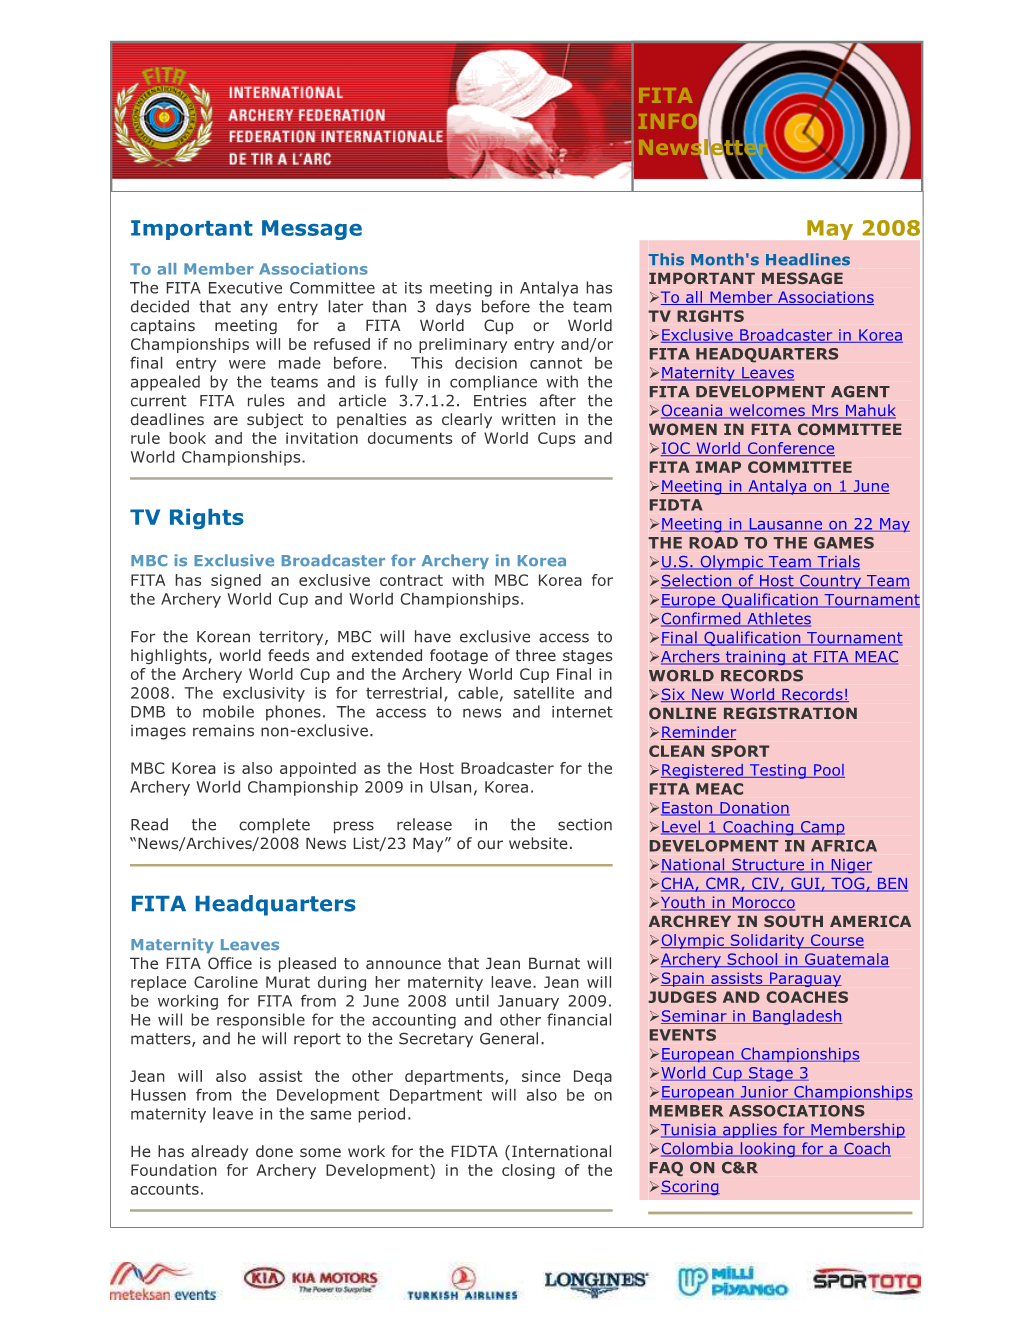 FITA INFO Newsletter May 2008